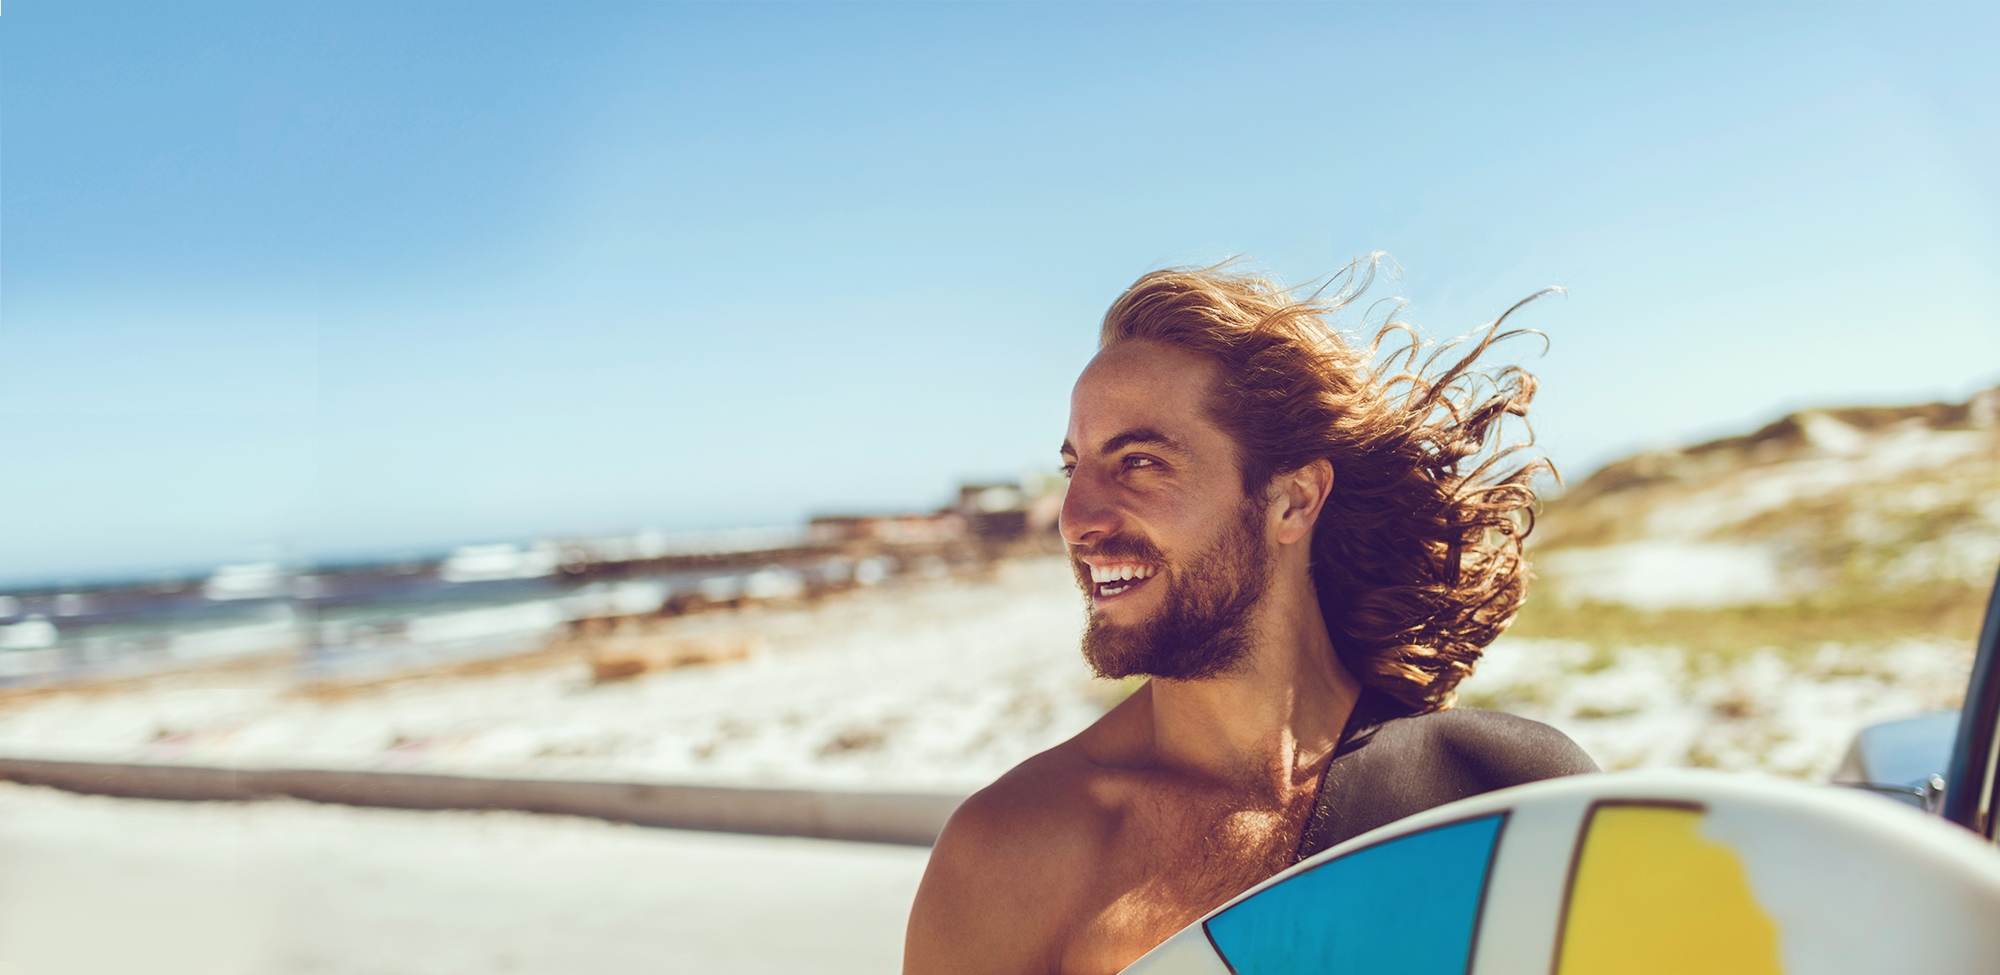 young man smiling while holding surfboard on beach